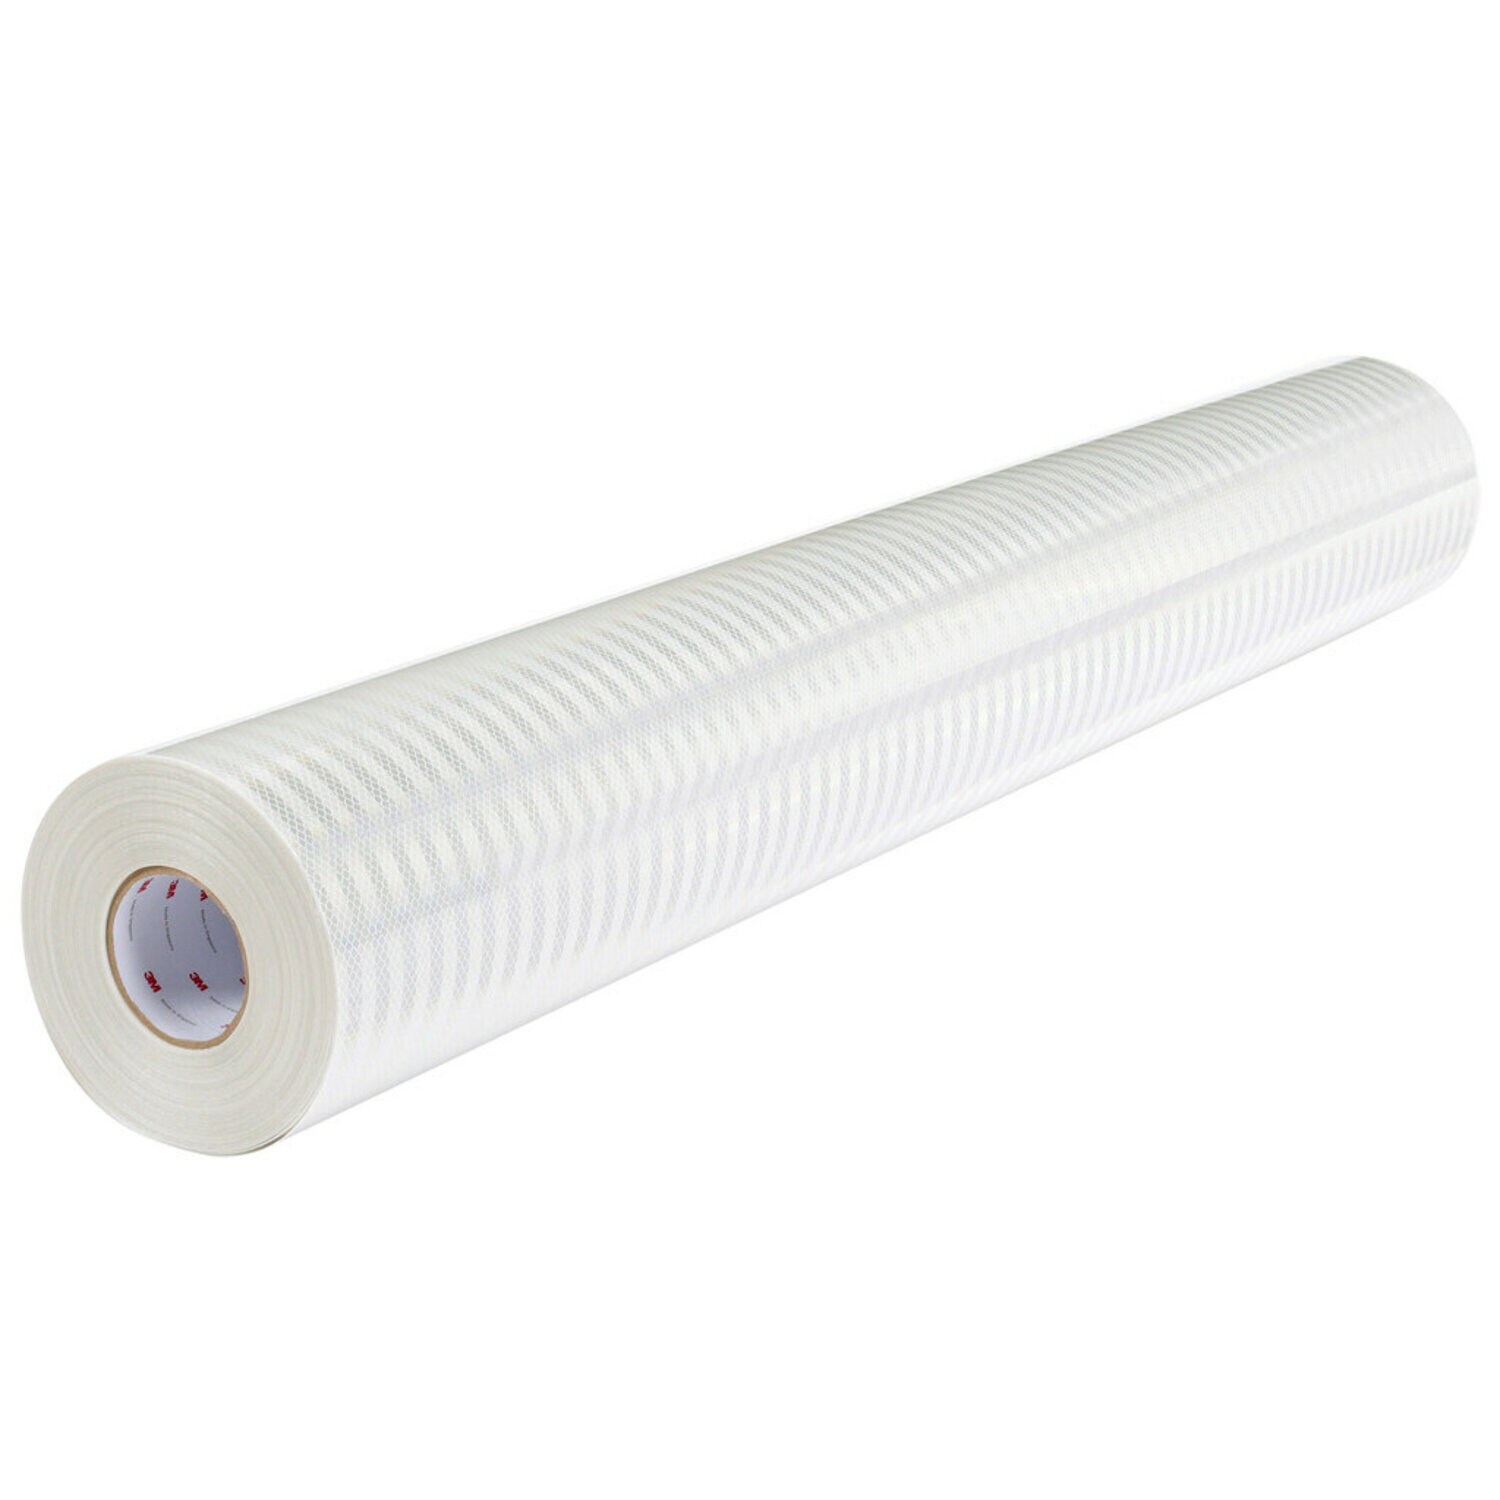 7100282388 - 3M High Intensity Prismatic Reflective Digital Sheeting 3930UDS, White, 36 in x 50 yd, 1 Roll/Case